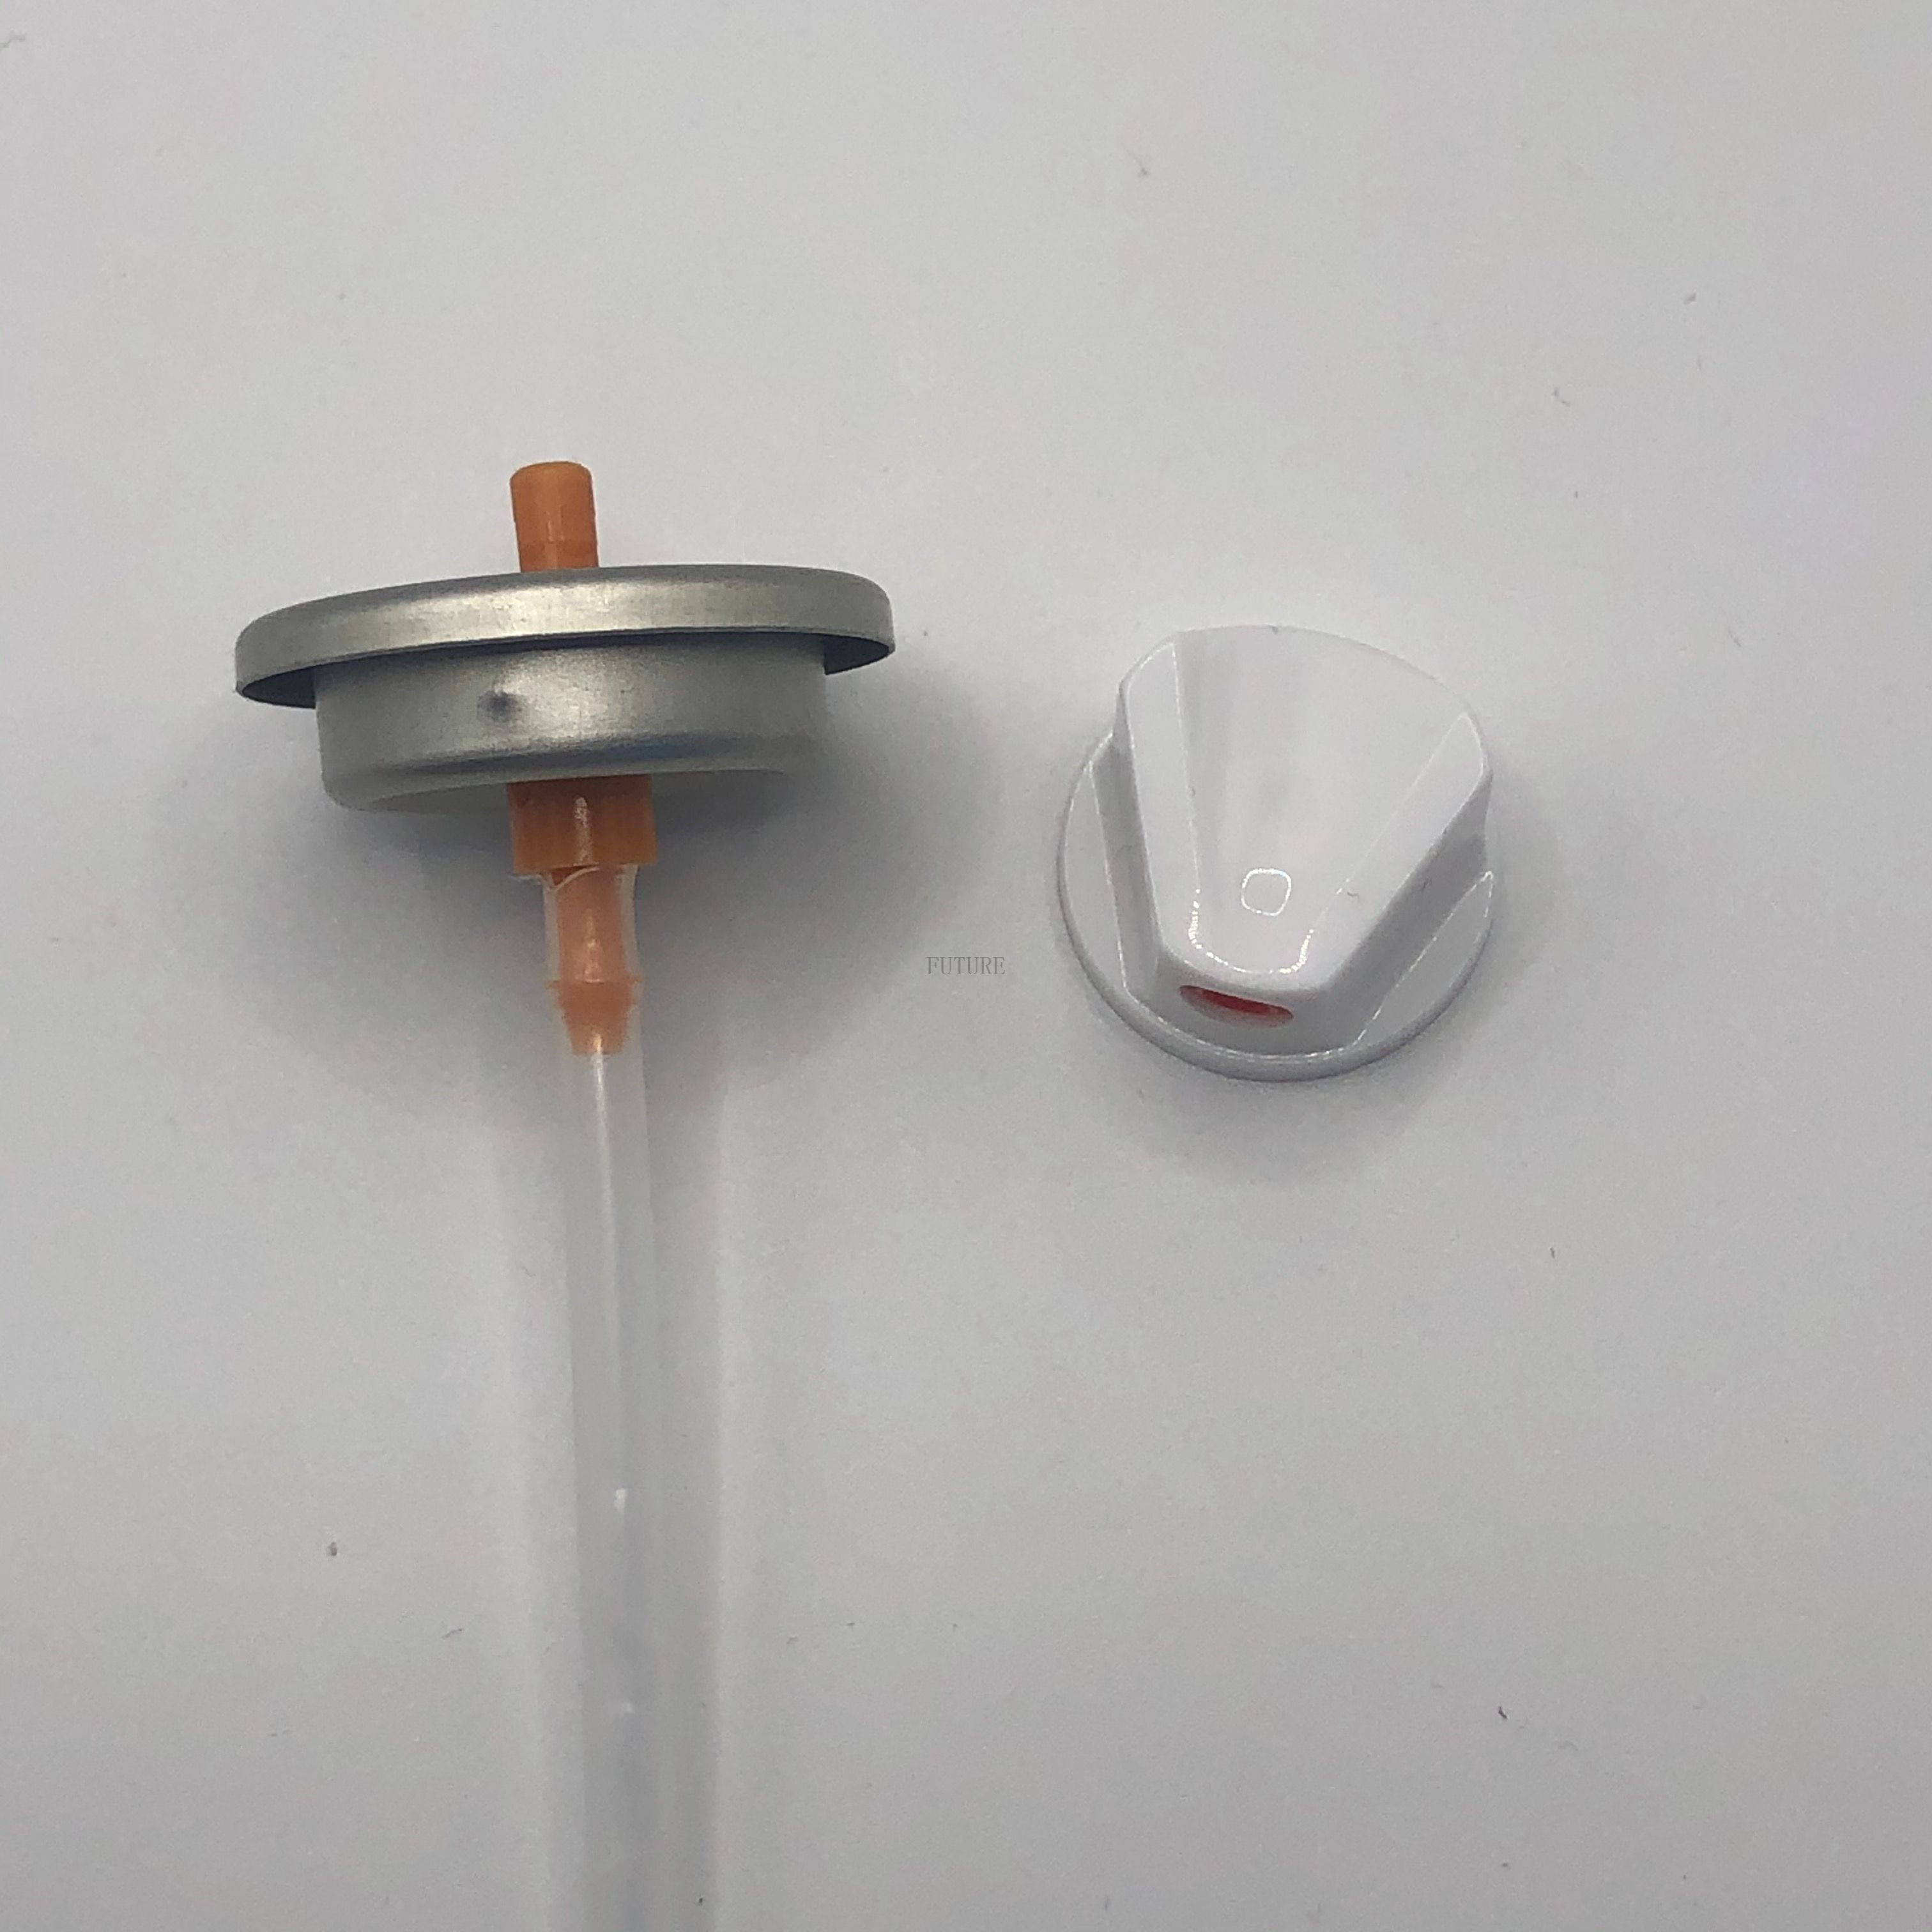 Precision Spray Control: Introducing Our Paint Spray Valve for Accurate Results